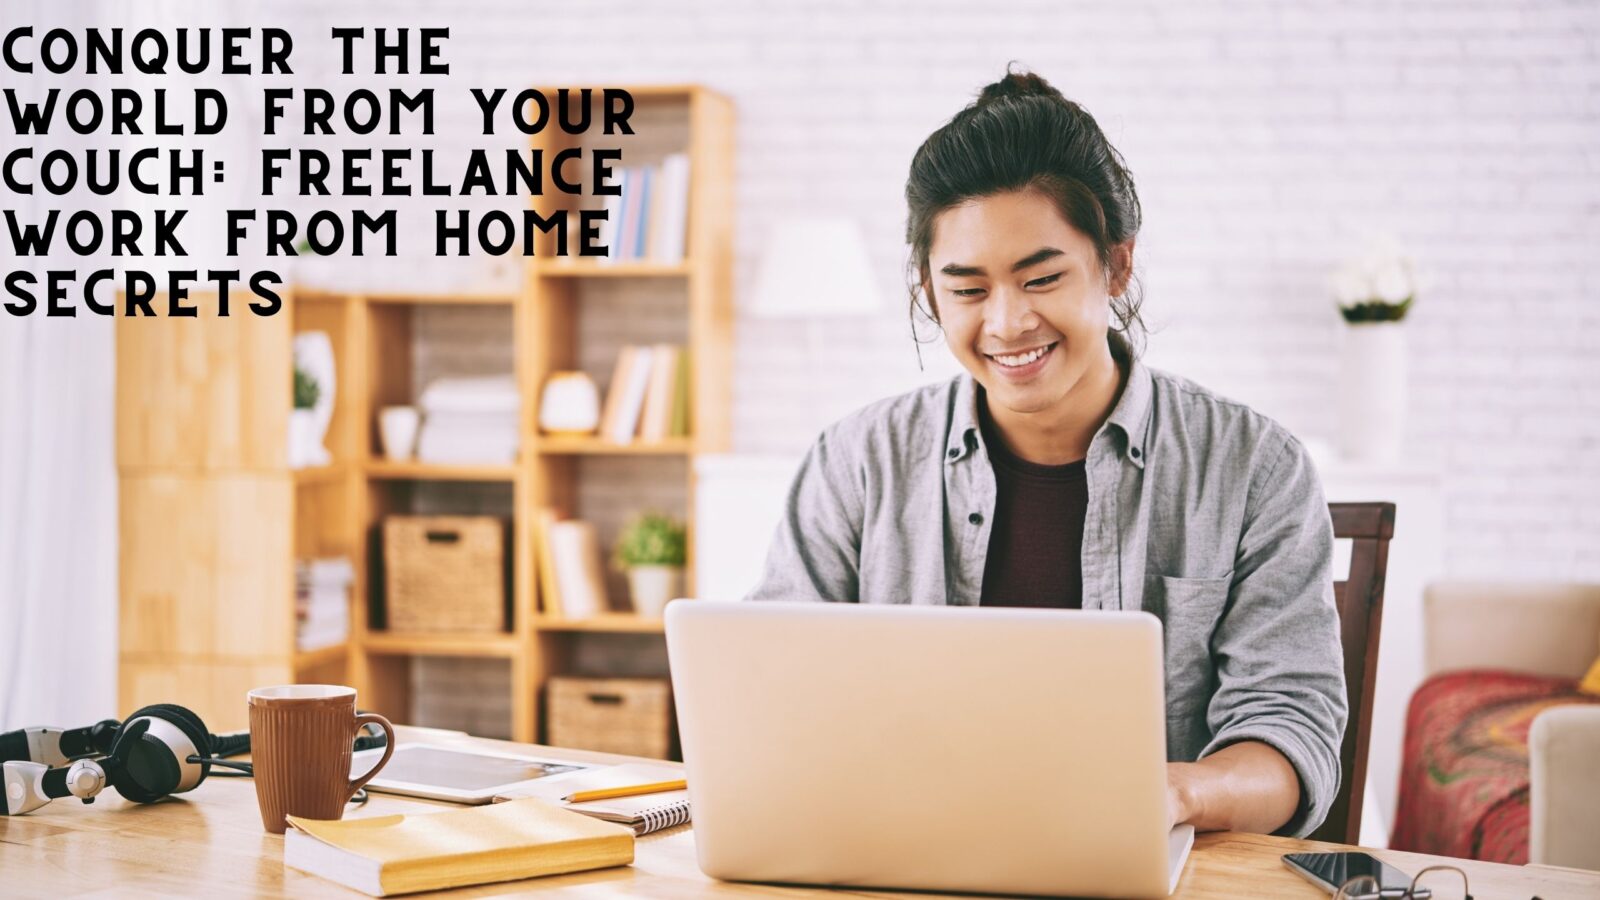 Conquer the World from Your Couch: Freelance Work from Home Secrets